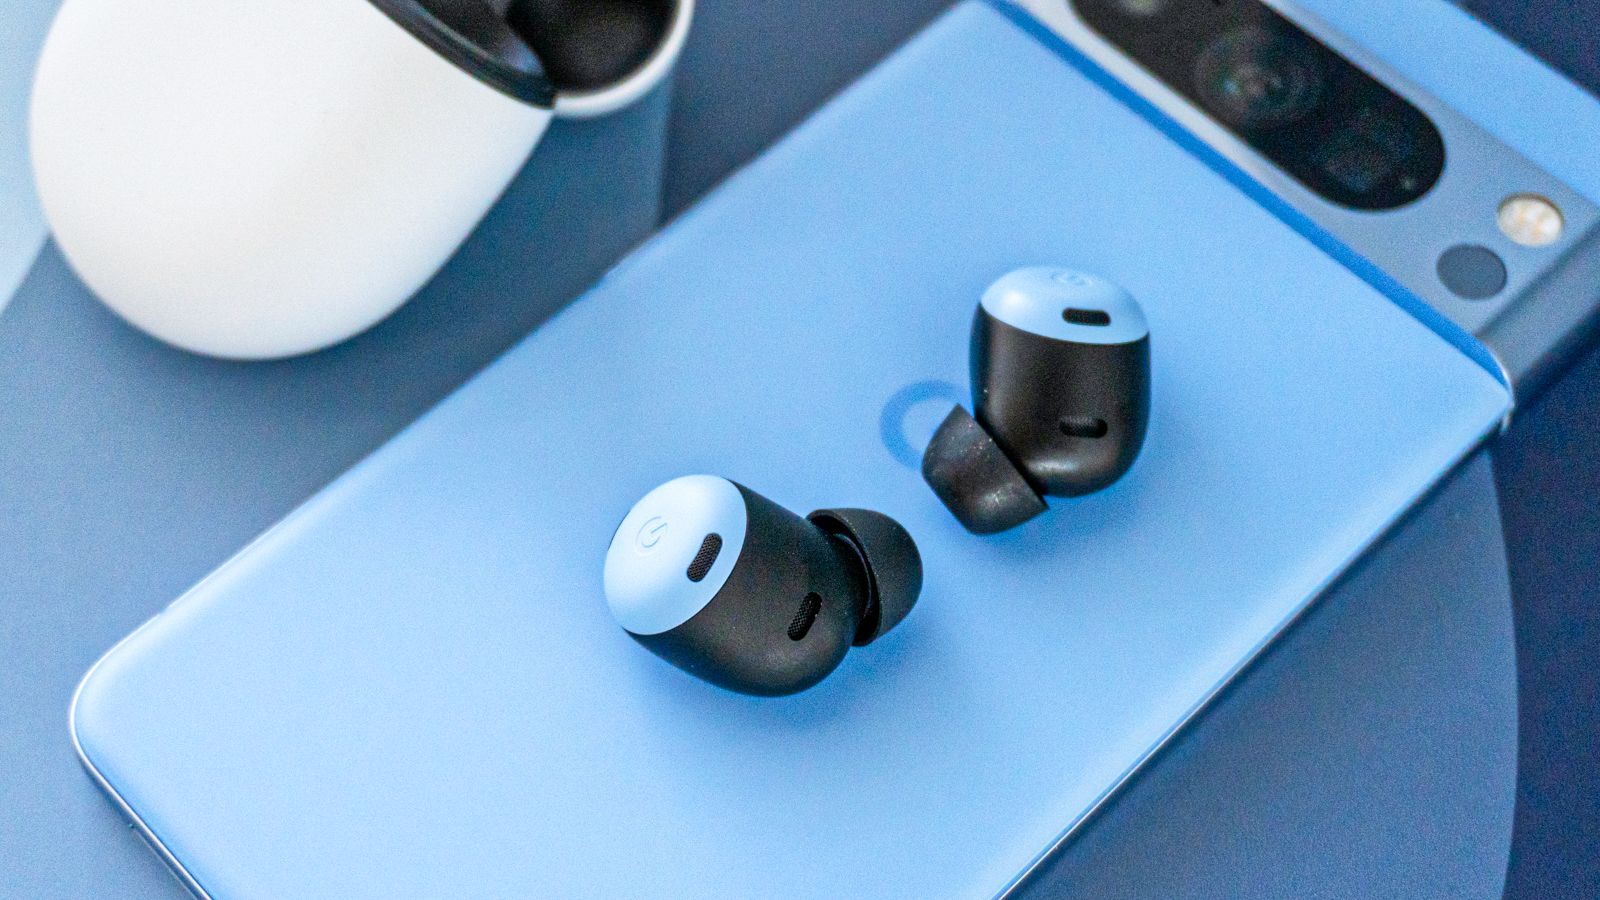 Earbud review: Google Pixel Buds Pro fall well short of their $200 price